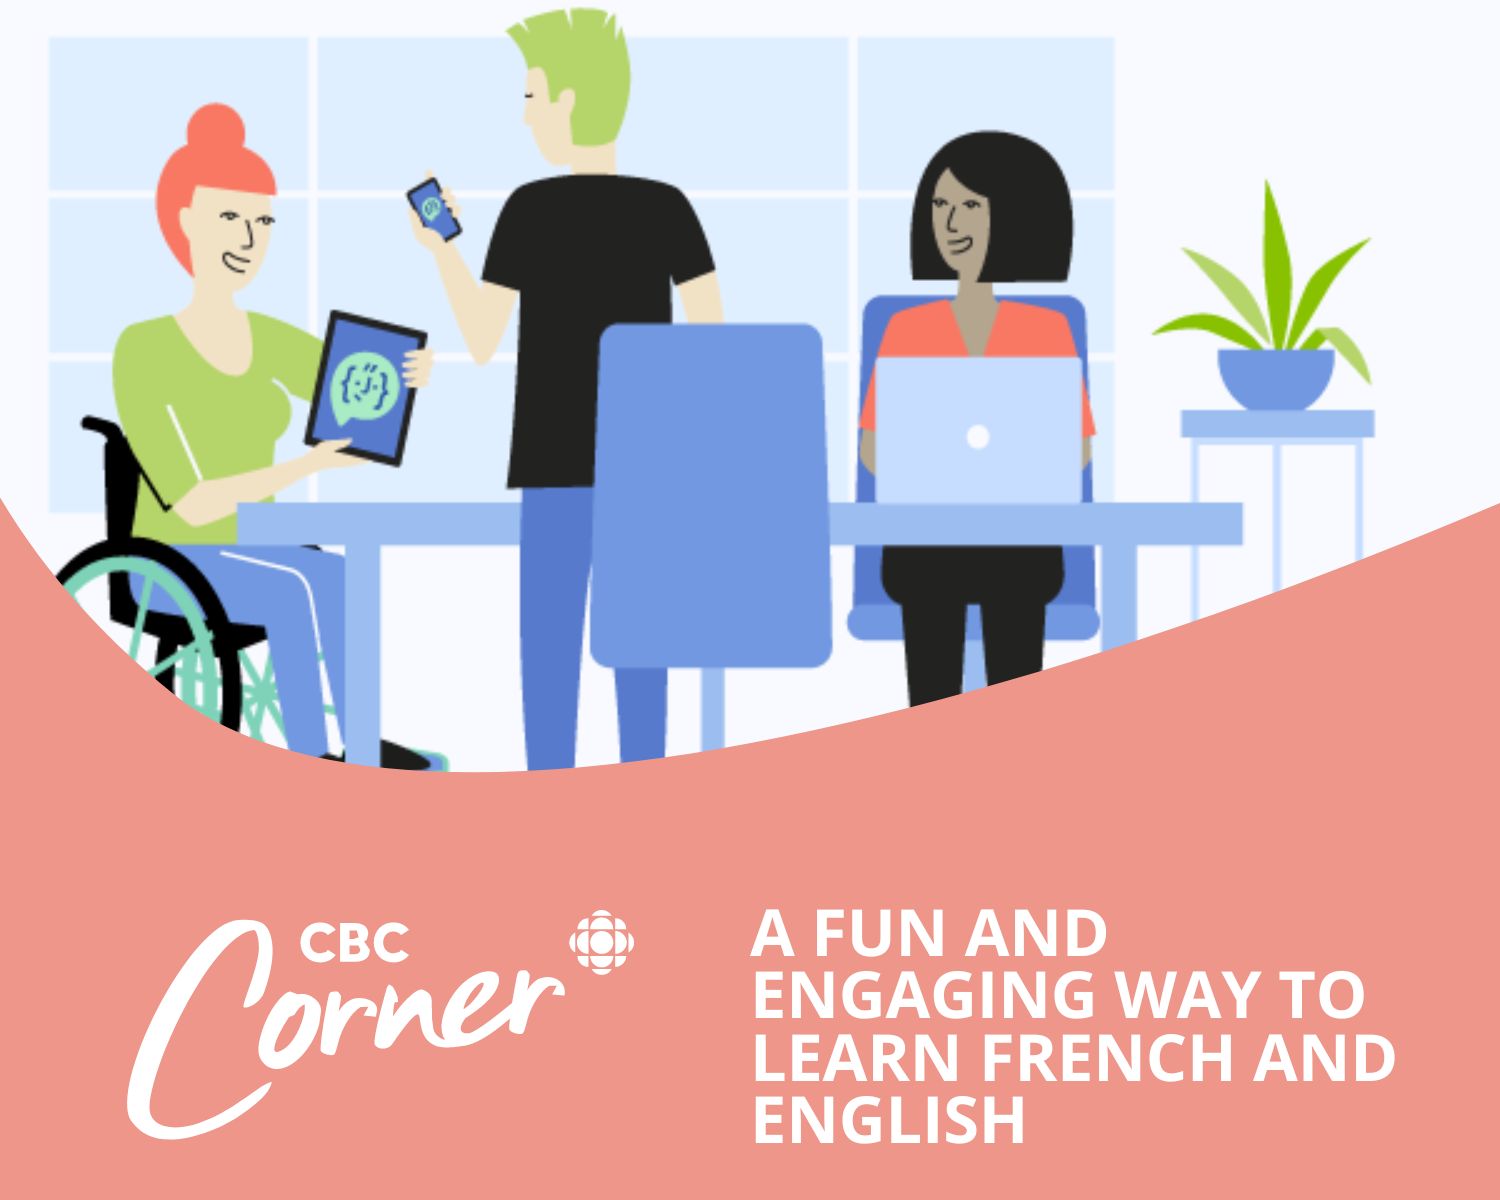 CBC Corner: Mauril - "A fun and engaging way to learn english and french" - A graphic of three people at a desk with a plant in the background